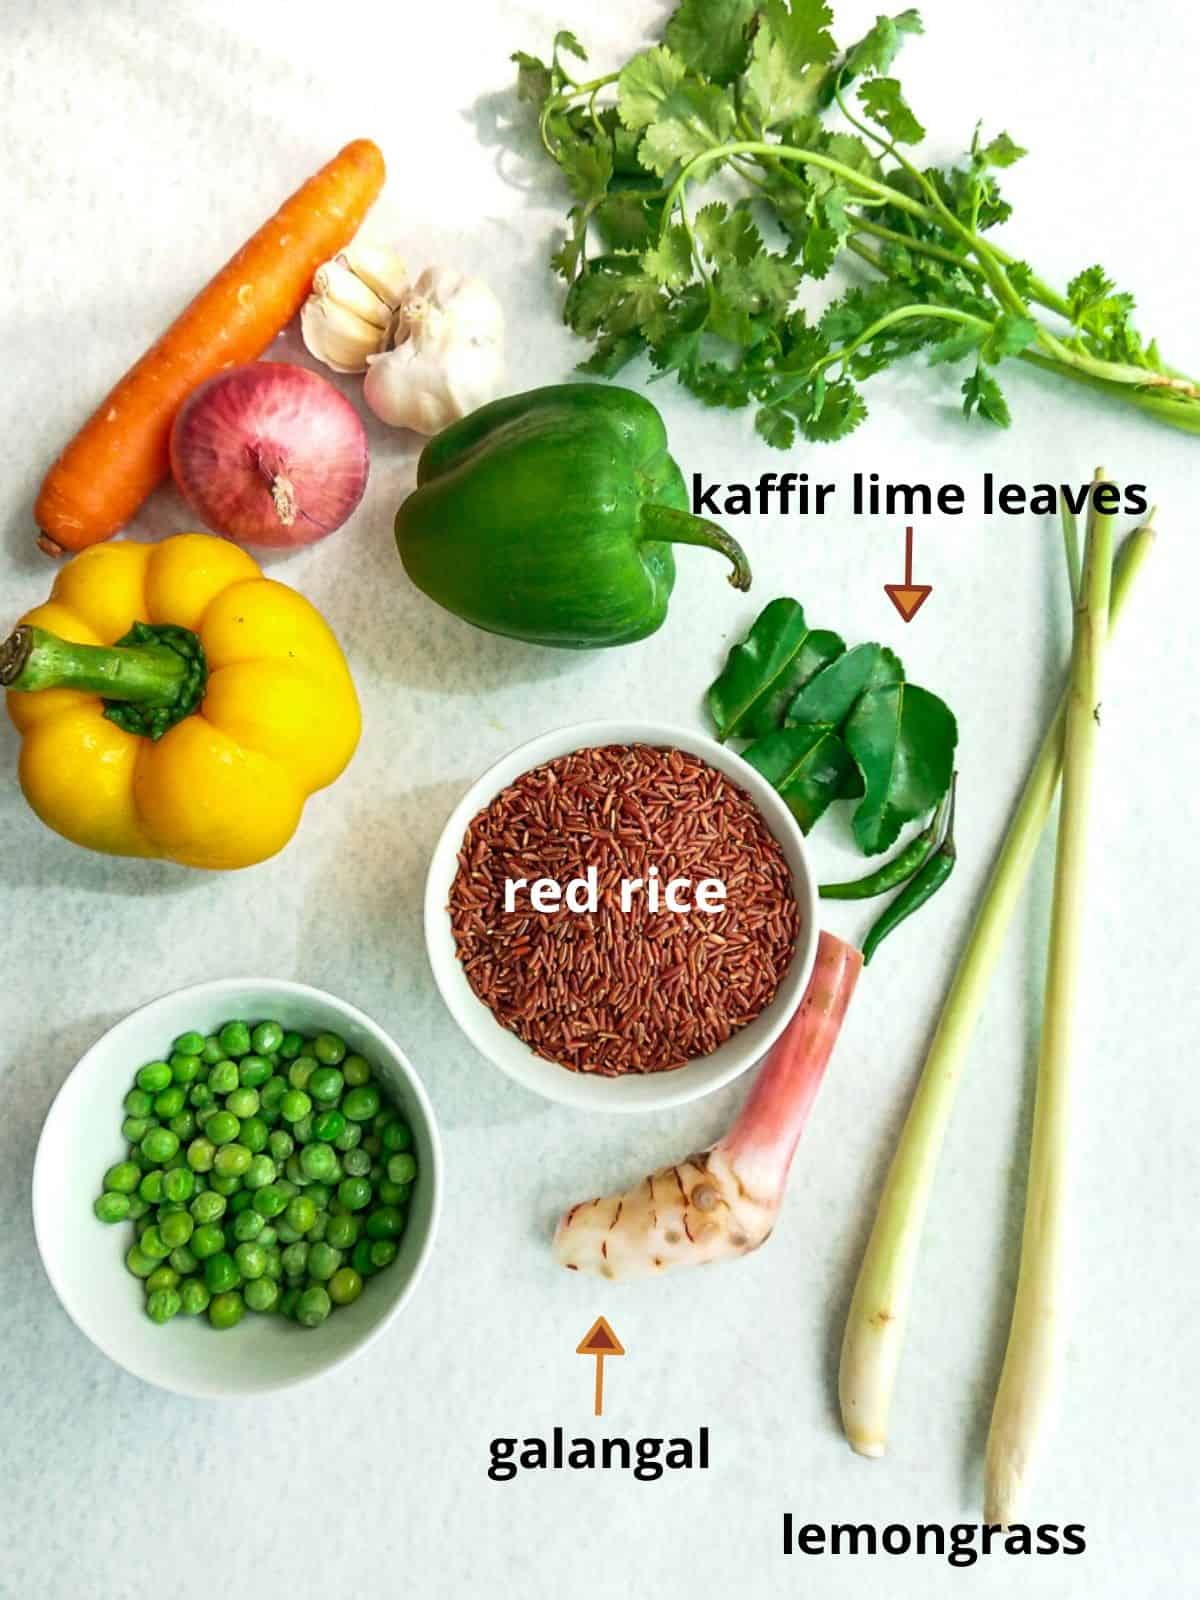 Labelled ingredients for Thai vegetarian fried rice recipe with red rice.